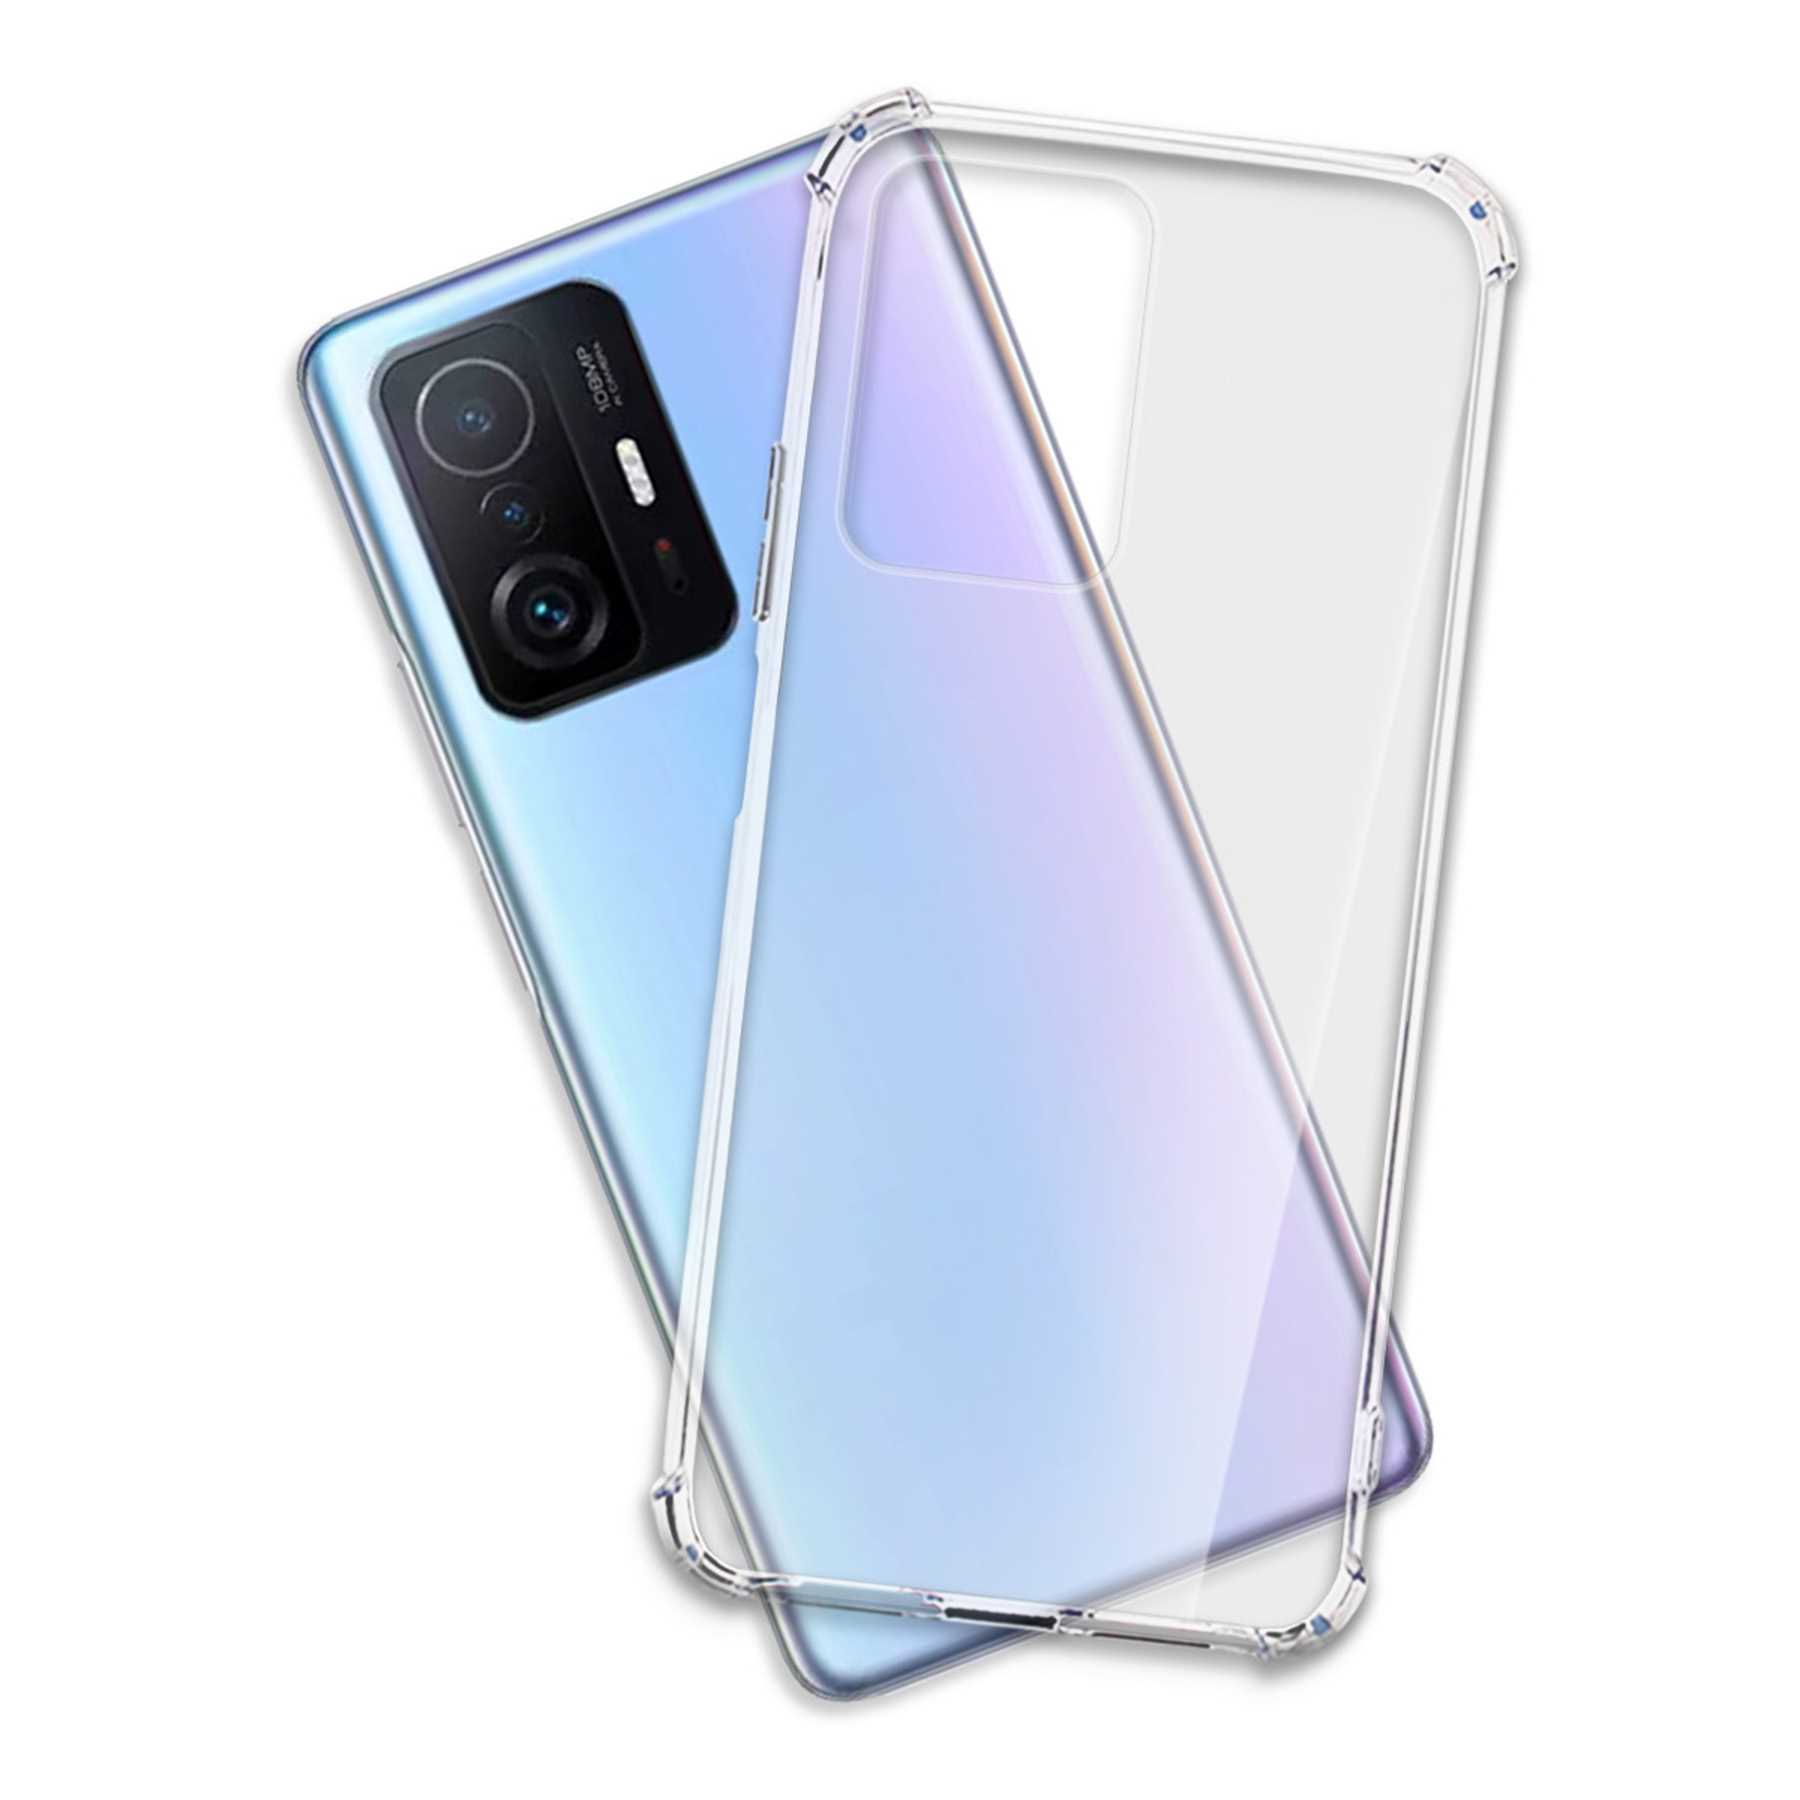 MTB MORE Transparent , Pro, 11T Case, 11T Clear Armor Backcover, ENERGY Xiaomi